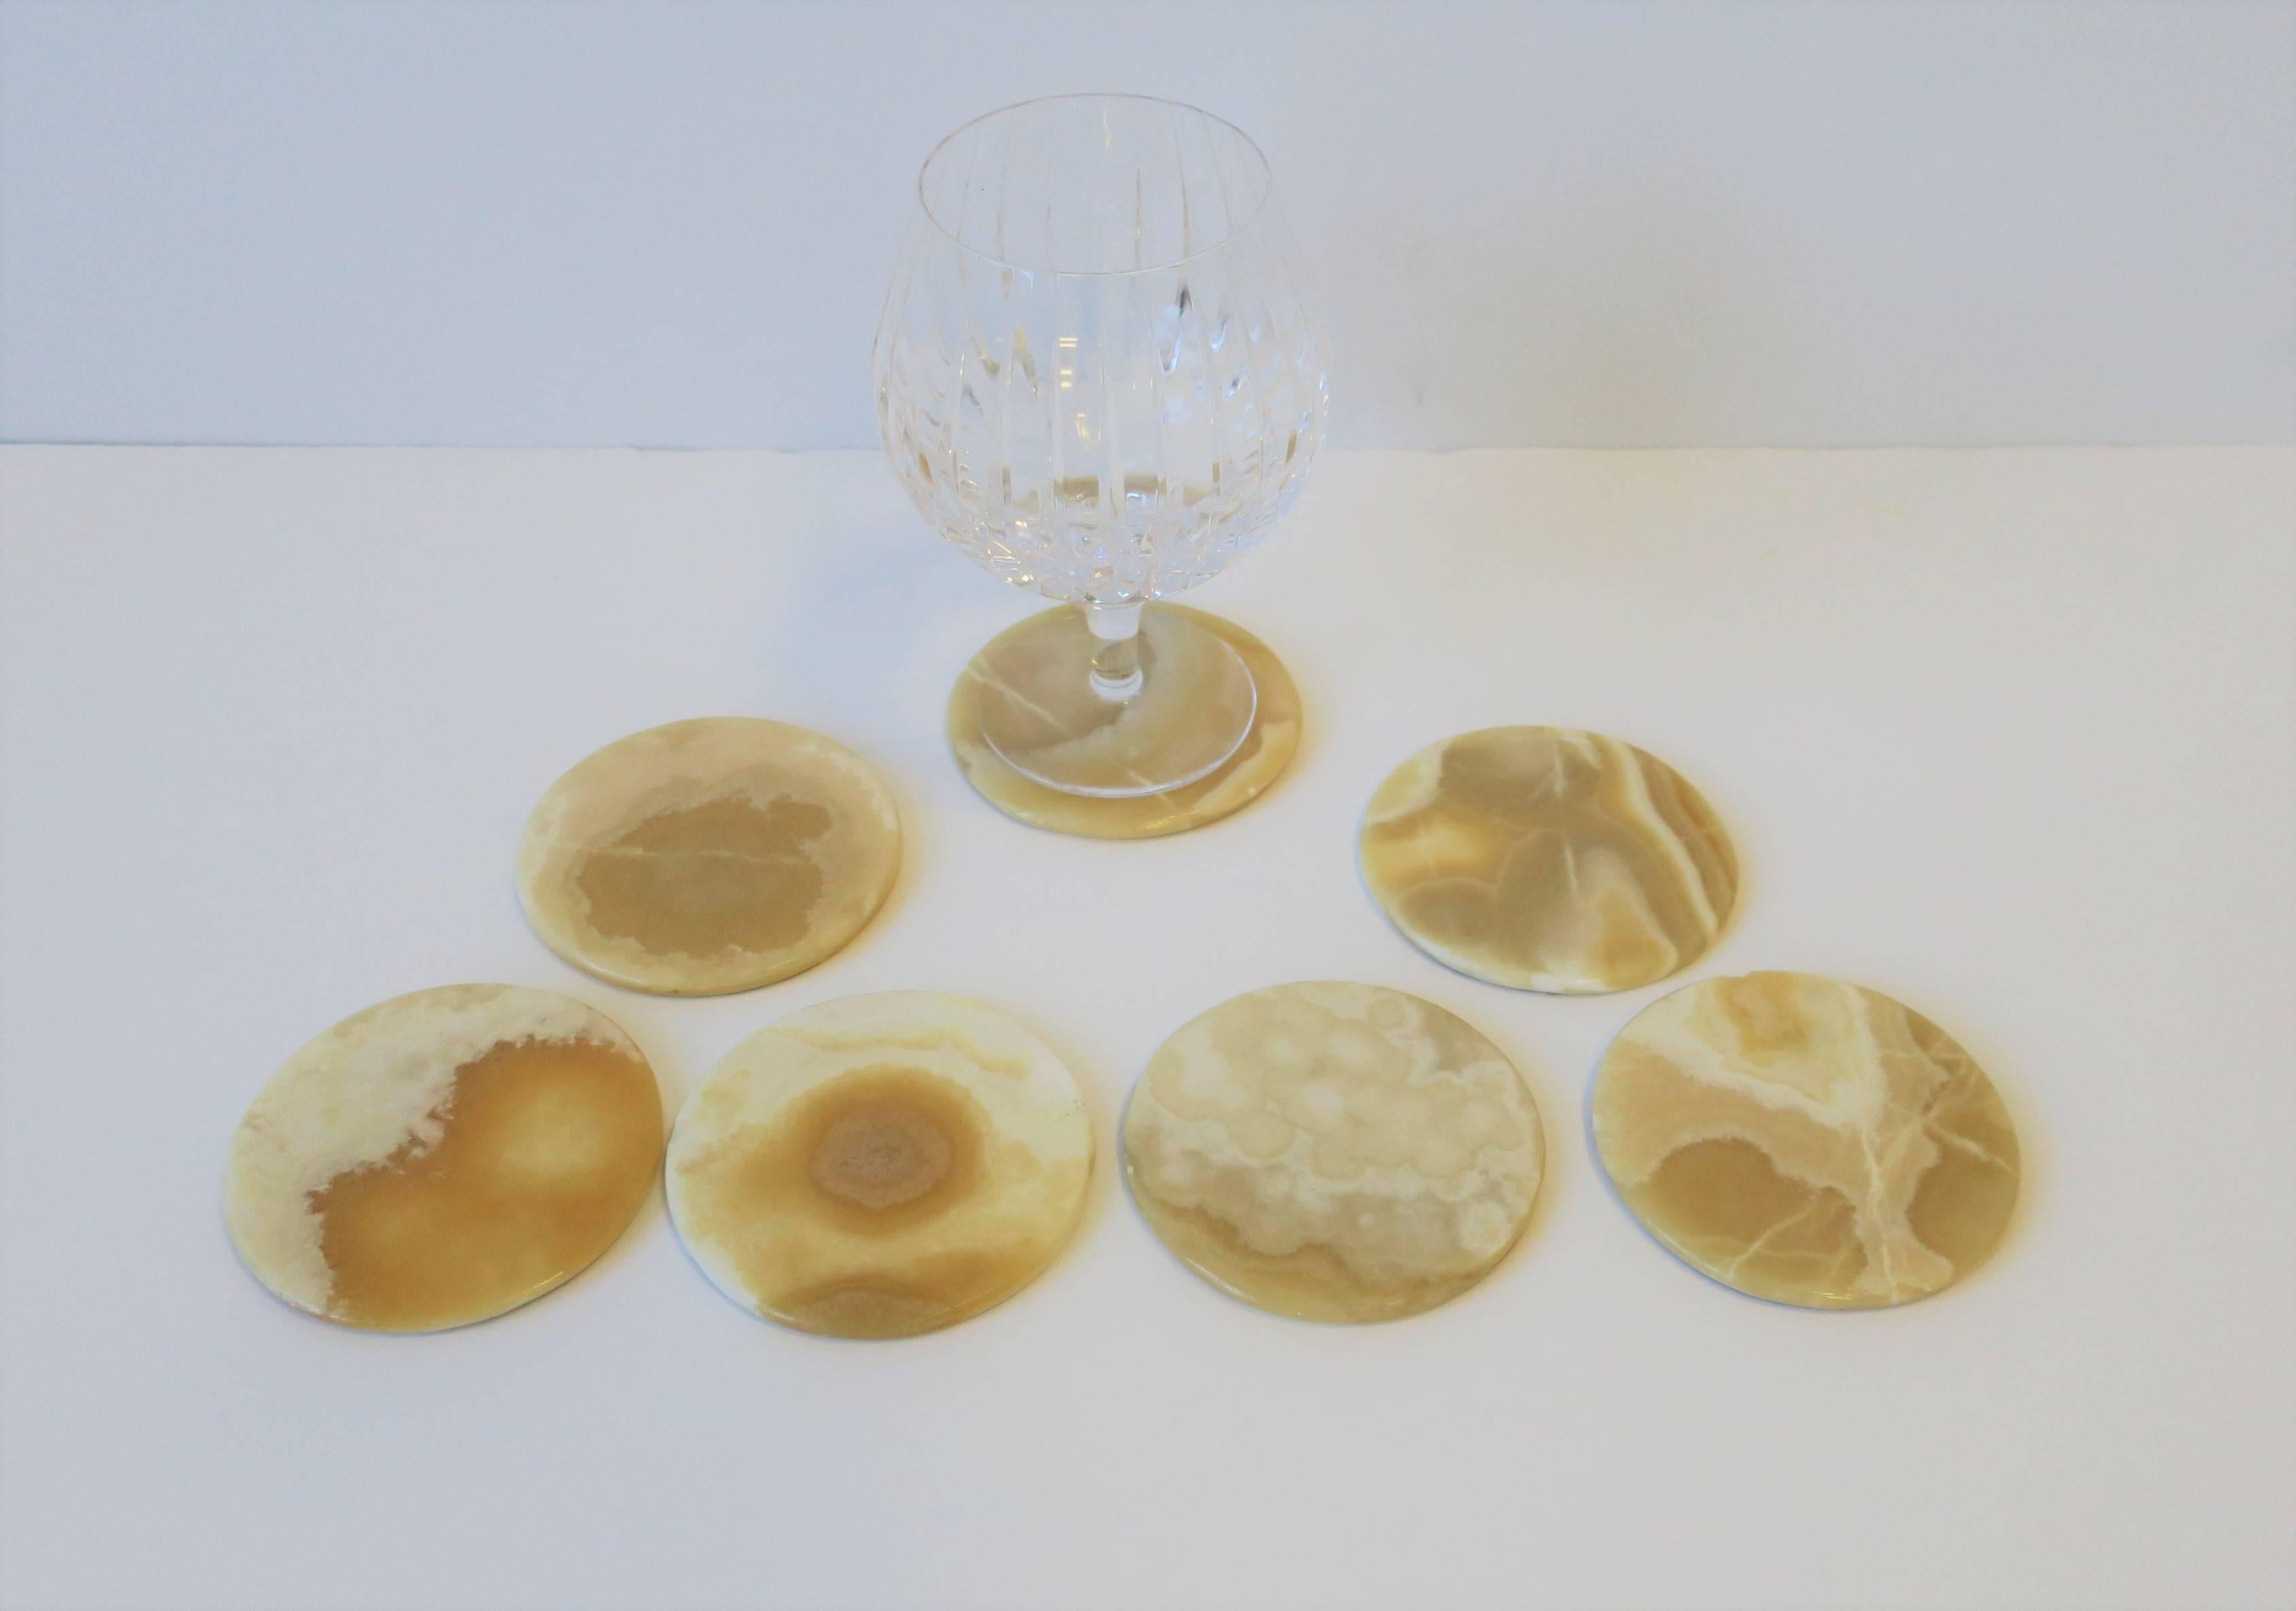 Polished Modern Onyx Marble Drinks or Cocktail Coaster Set, ca. 1970s